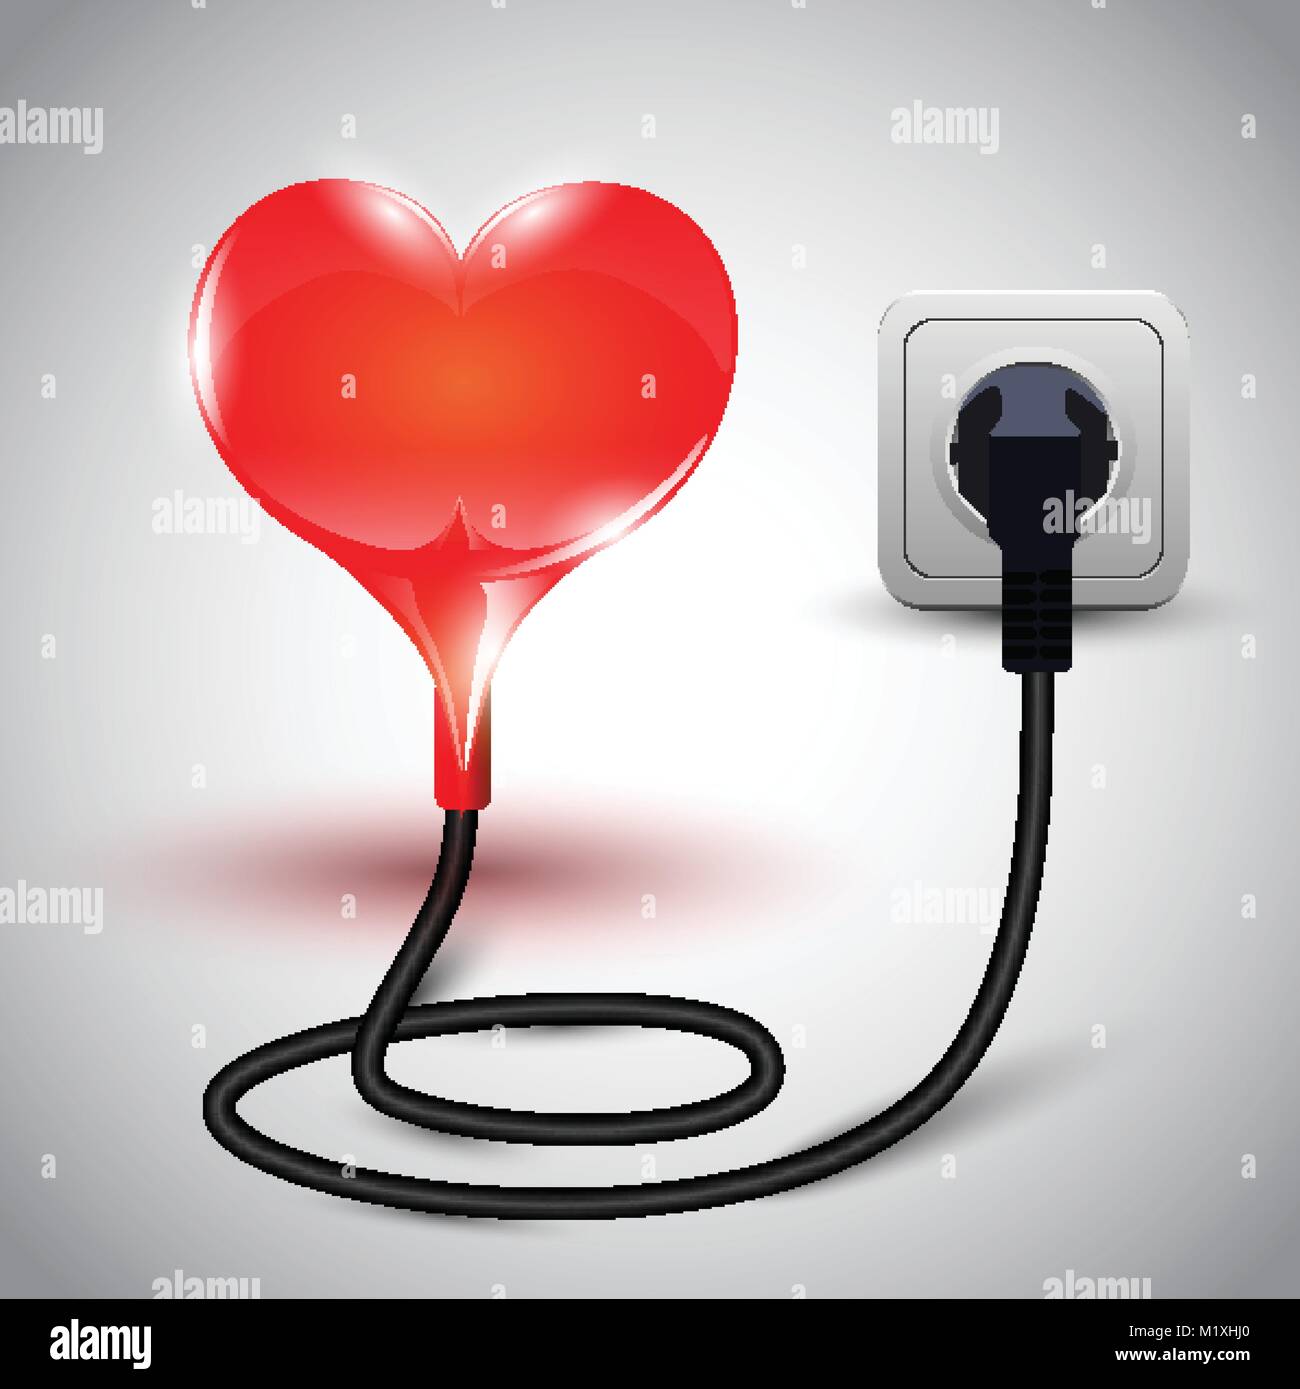 vector illustration of heart with power cable Stock Vector